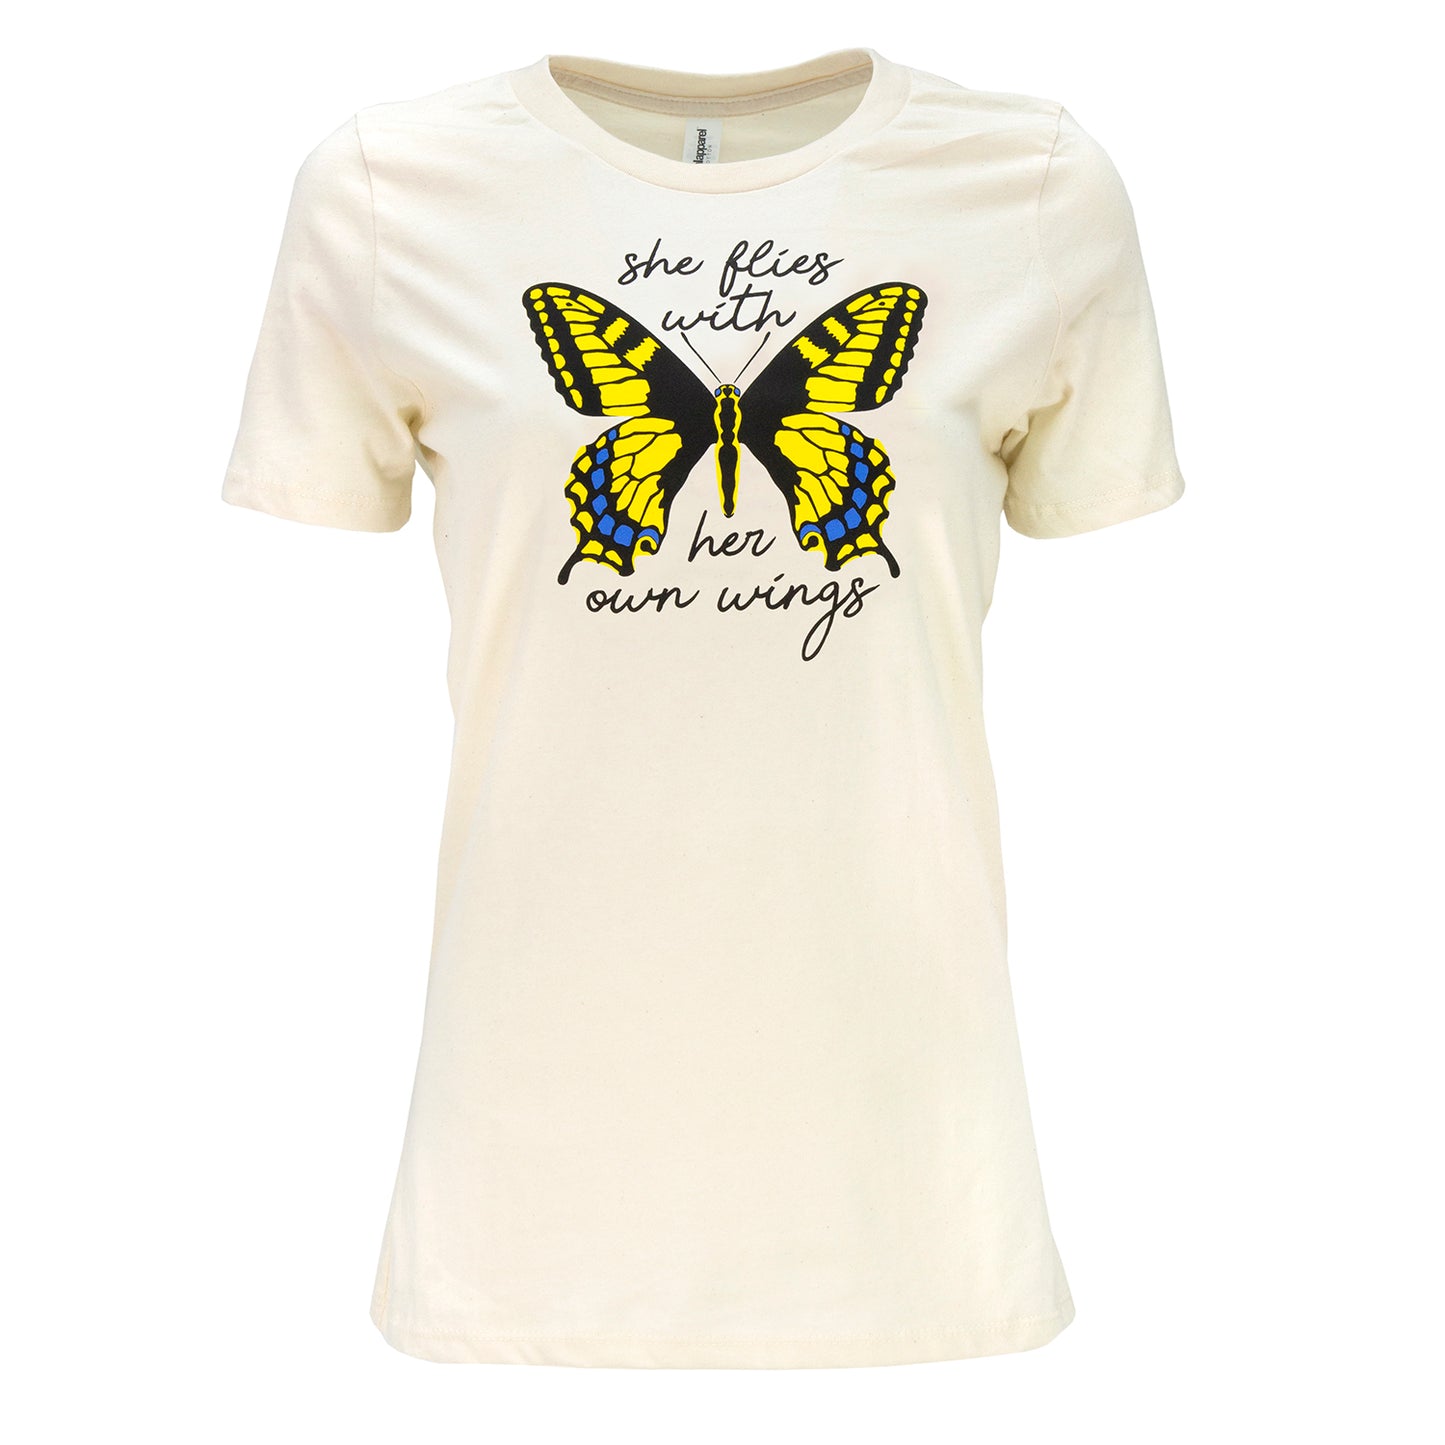 This women's tee shirt features Oregon's state insect, the Oregon Swallowtail, and the state's official motto: She flies with her own wings